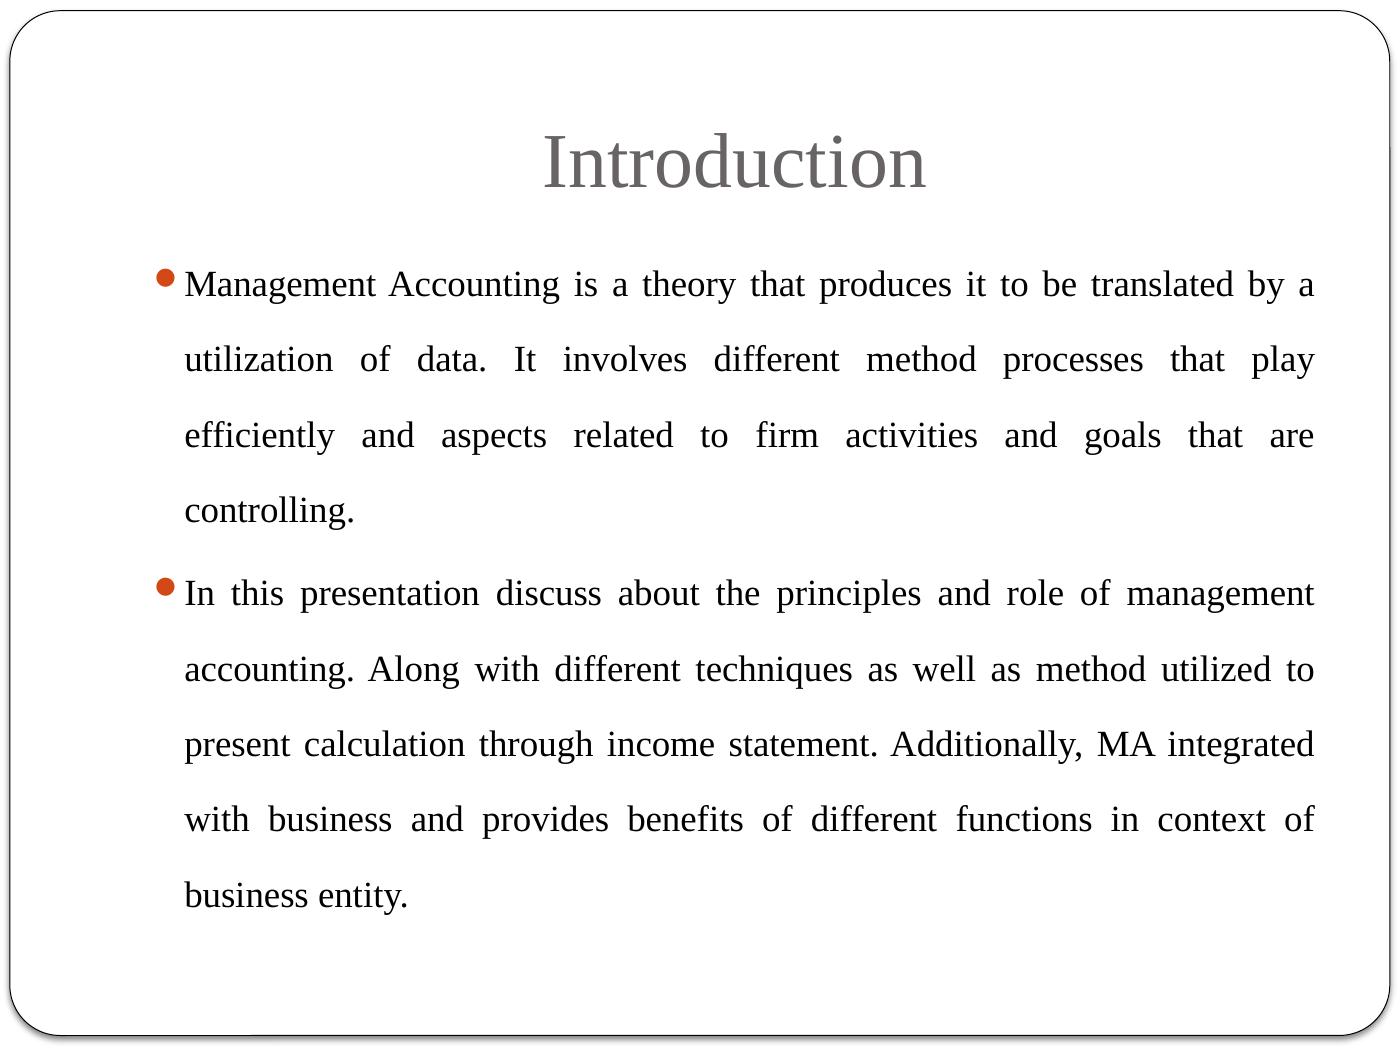 Management Accounting: Principles, Role, and Techniques_3